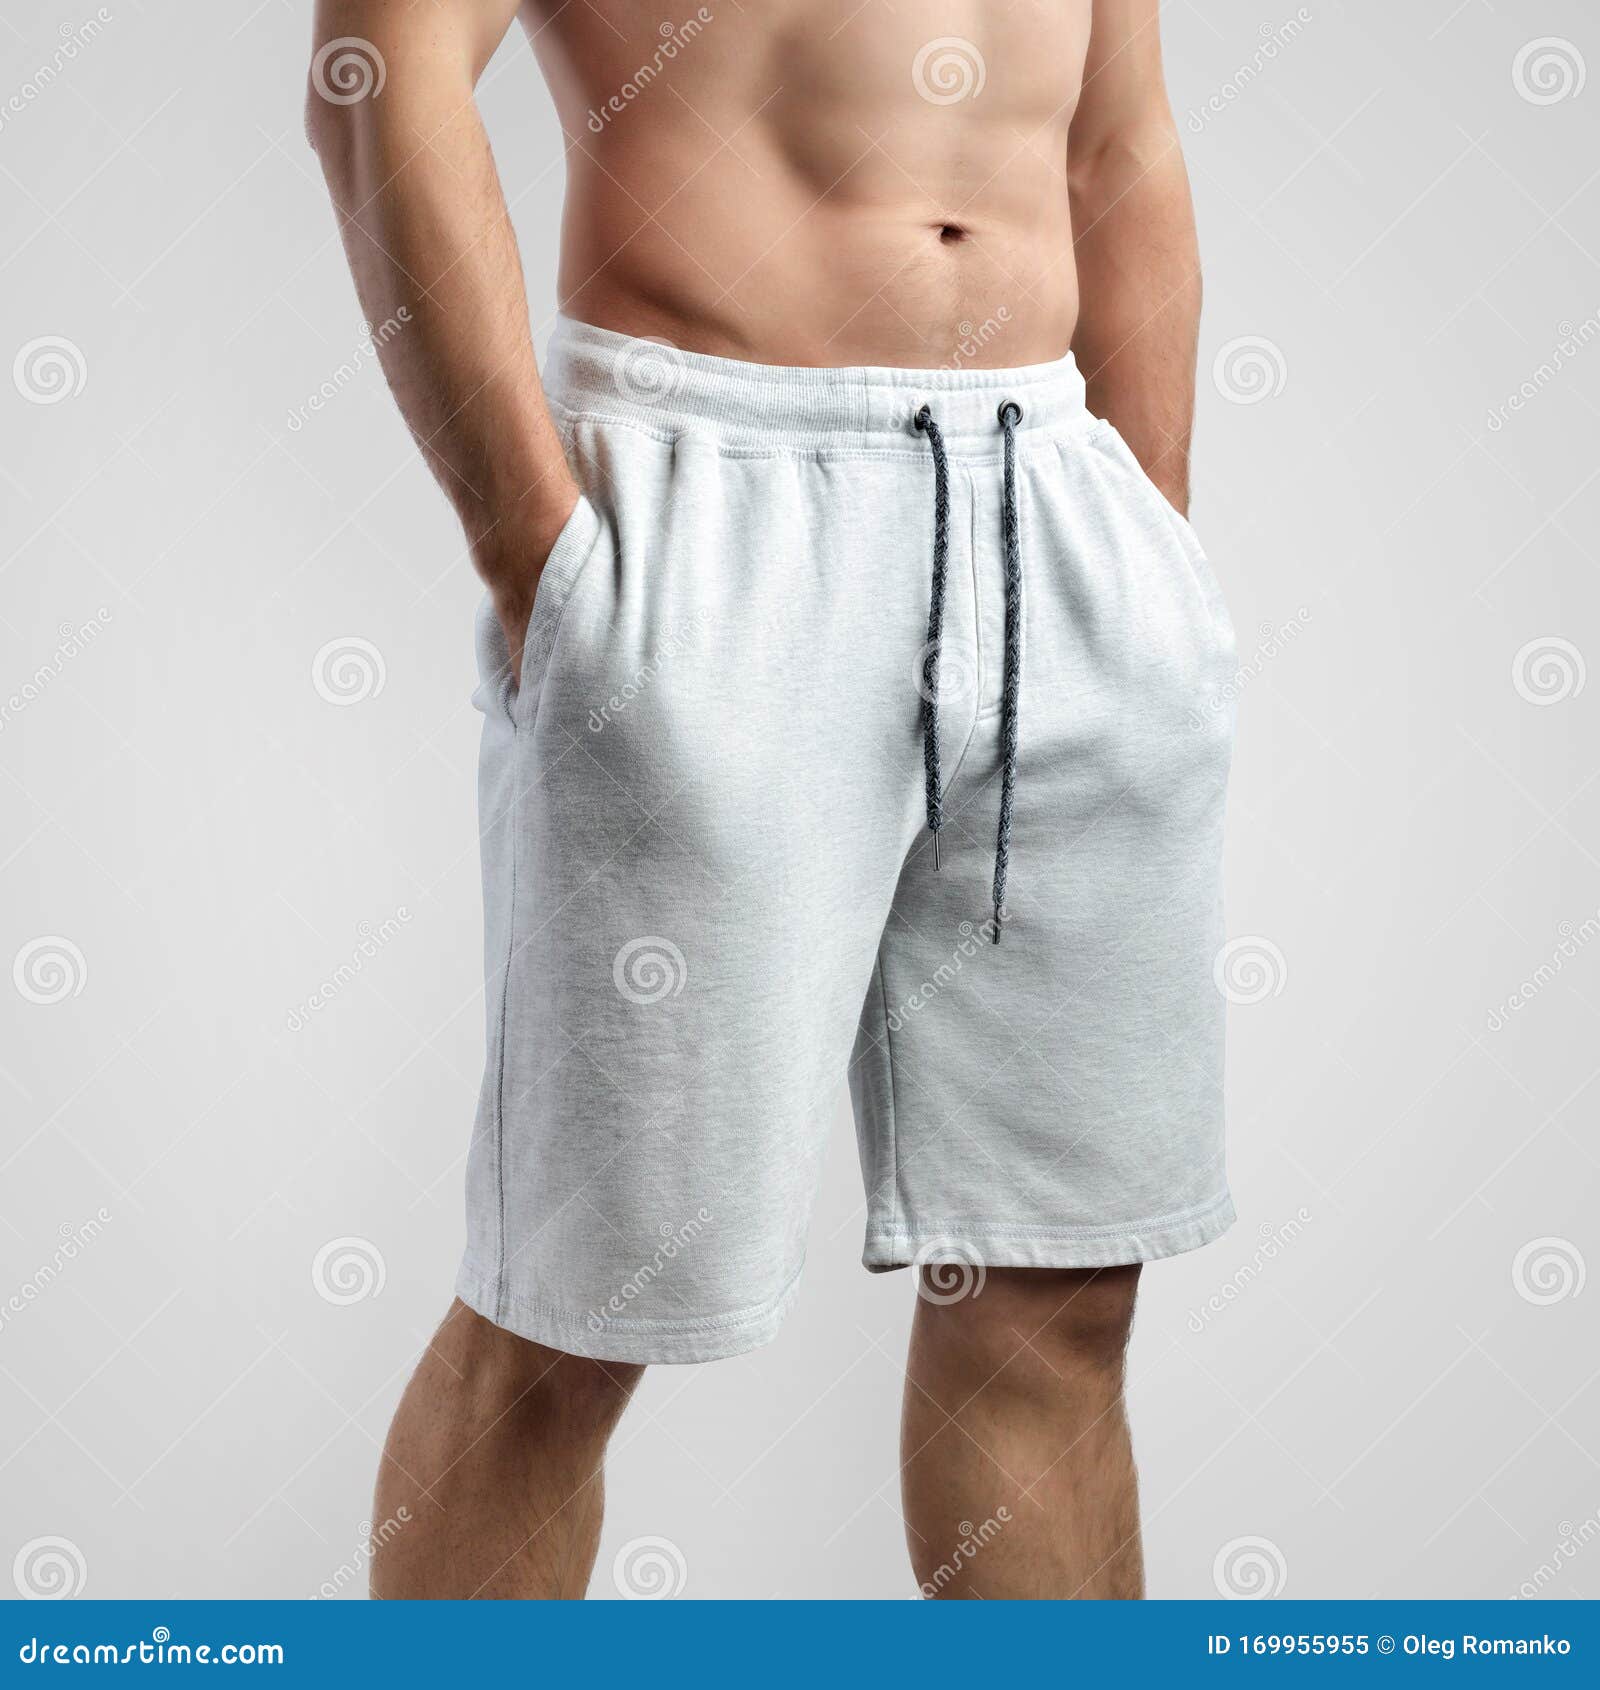 Download Mockup Of White Men`s Shorts On An Isolated Background ...